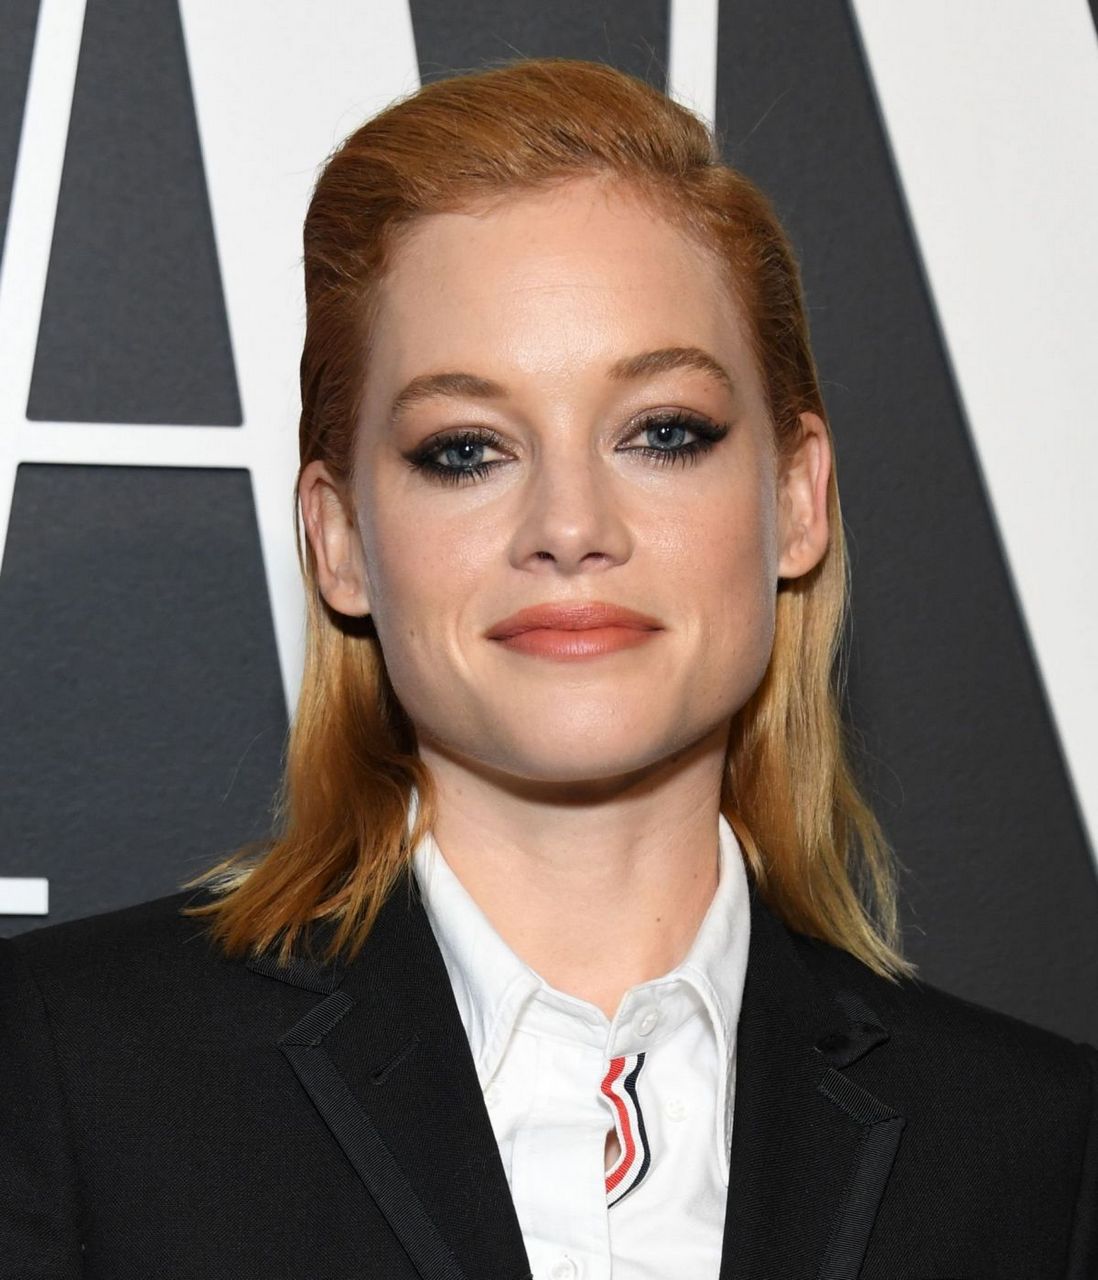 Jane Levy Vanity Fair And Lancome Celebrate Future Of Hollywood Los Angeles